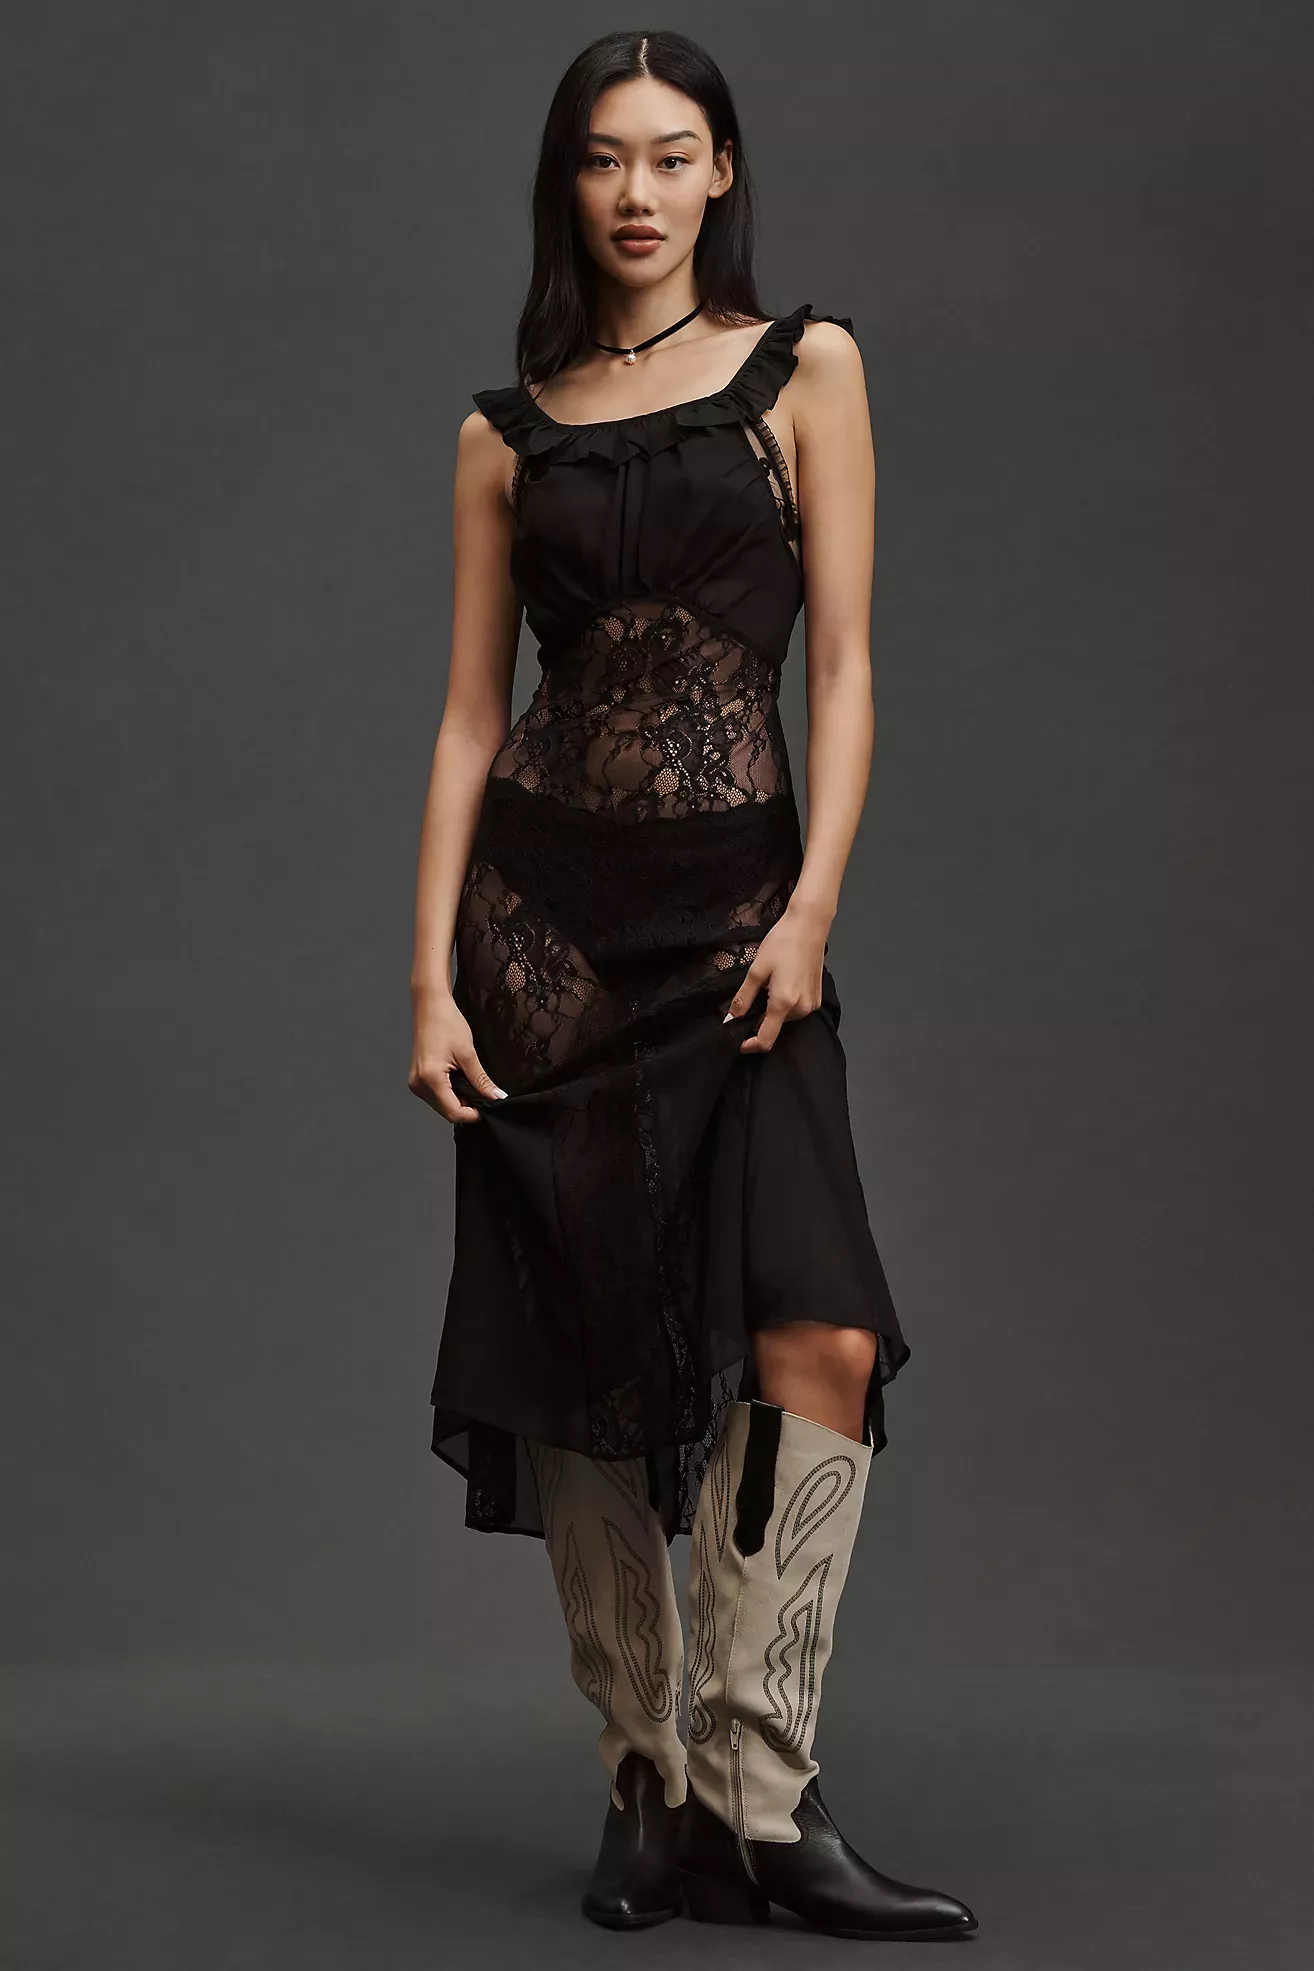 By Anthropologie Smocked Sheer Lace Overlay Dress